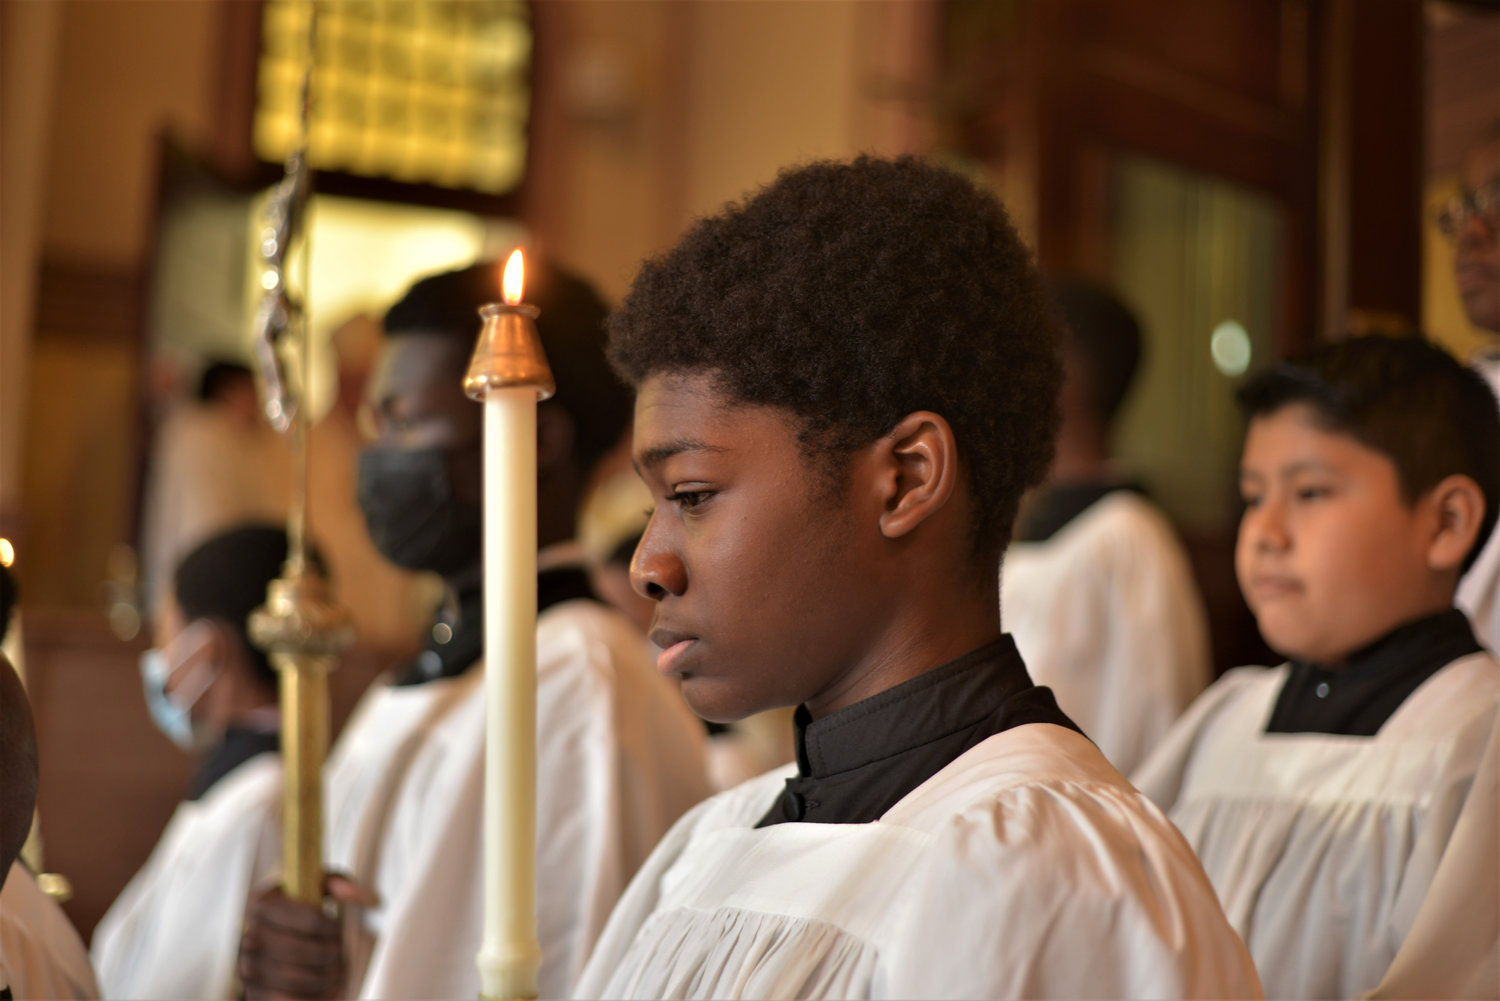 Altar server Michael Oppong holds a candle during the Oct. 22 Mass commemorating the 125th anniversary of St. Luke’s parish in the Bronx. Cardinal Dolan served as the principal celebrant and homilist. “You know today is the feast of Pope St. John Paul II,” the cardinal said. “And Pope St. John Paul II once called the parish ‘the family of families,’ and that’s so true here at St. Luke’s.”